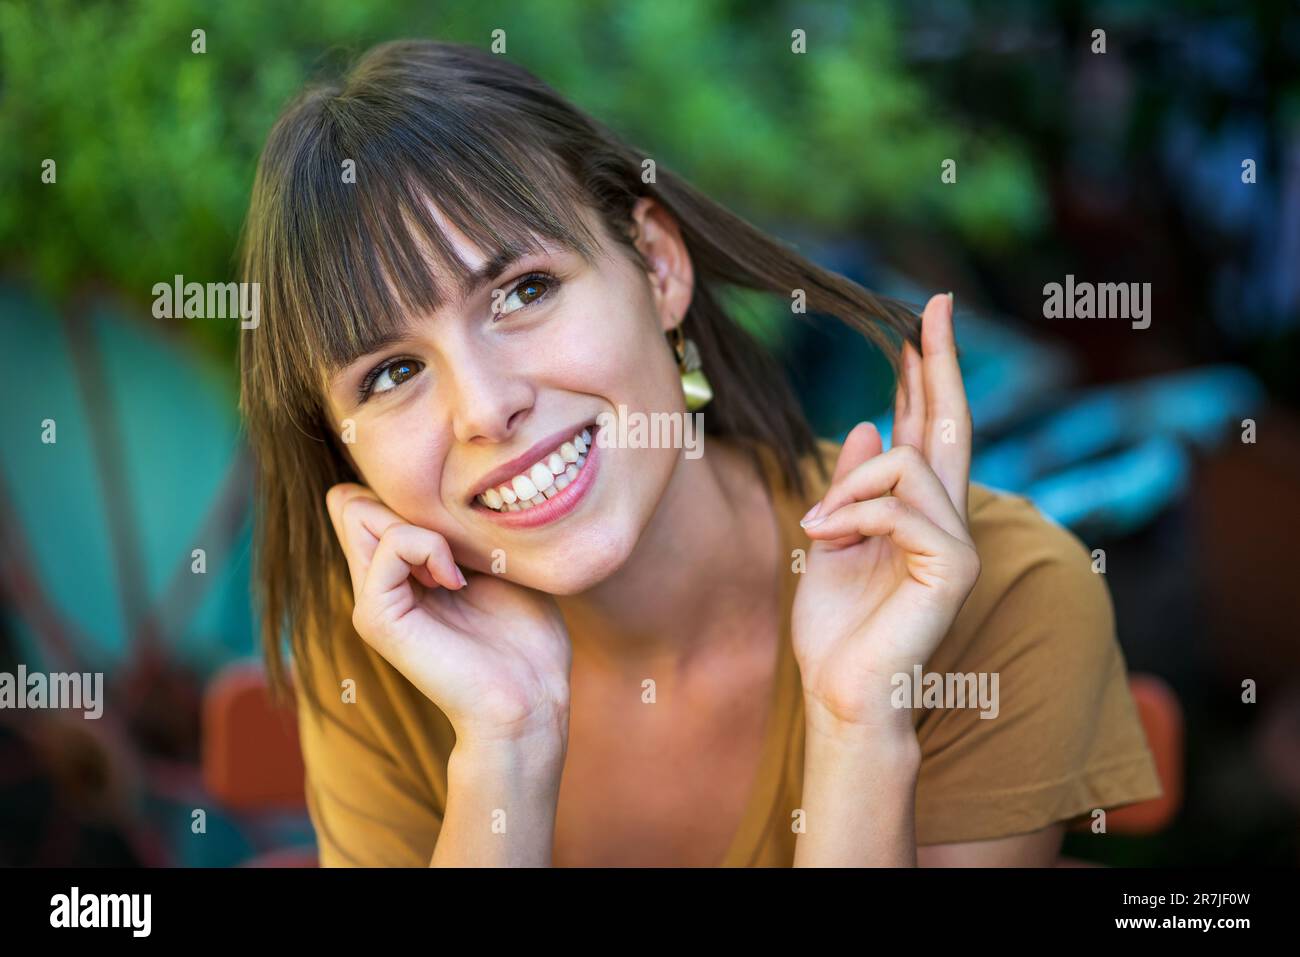 Portrait of positive young female with toothy smile looking away with hand at chin and touching hair while sitting on chair against blurred green tree Stock Photo